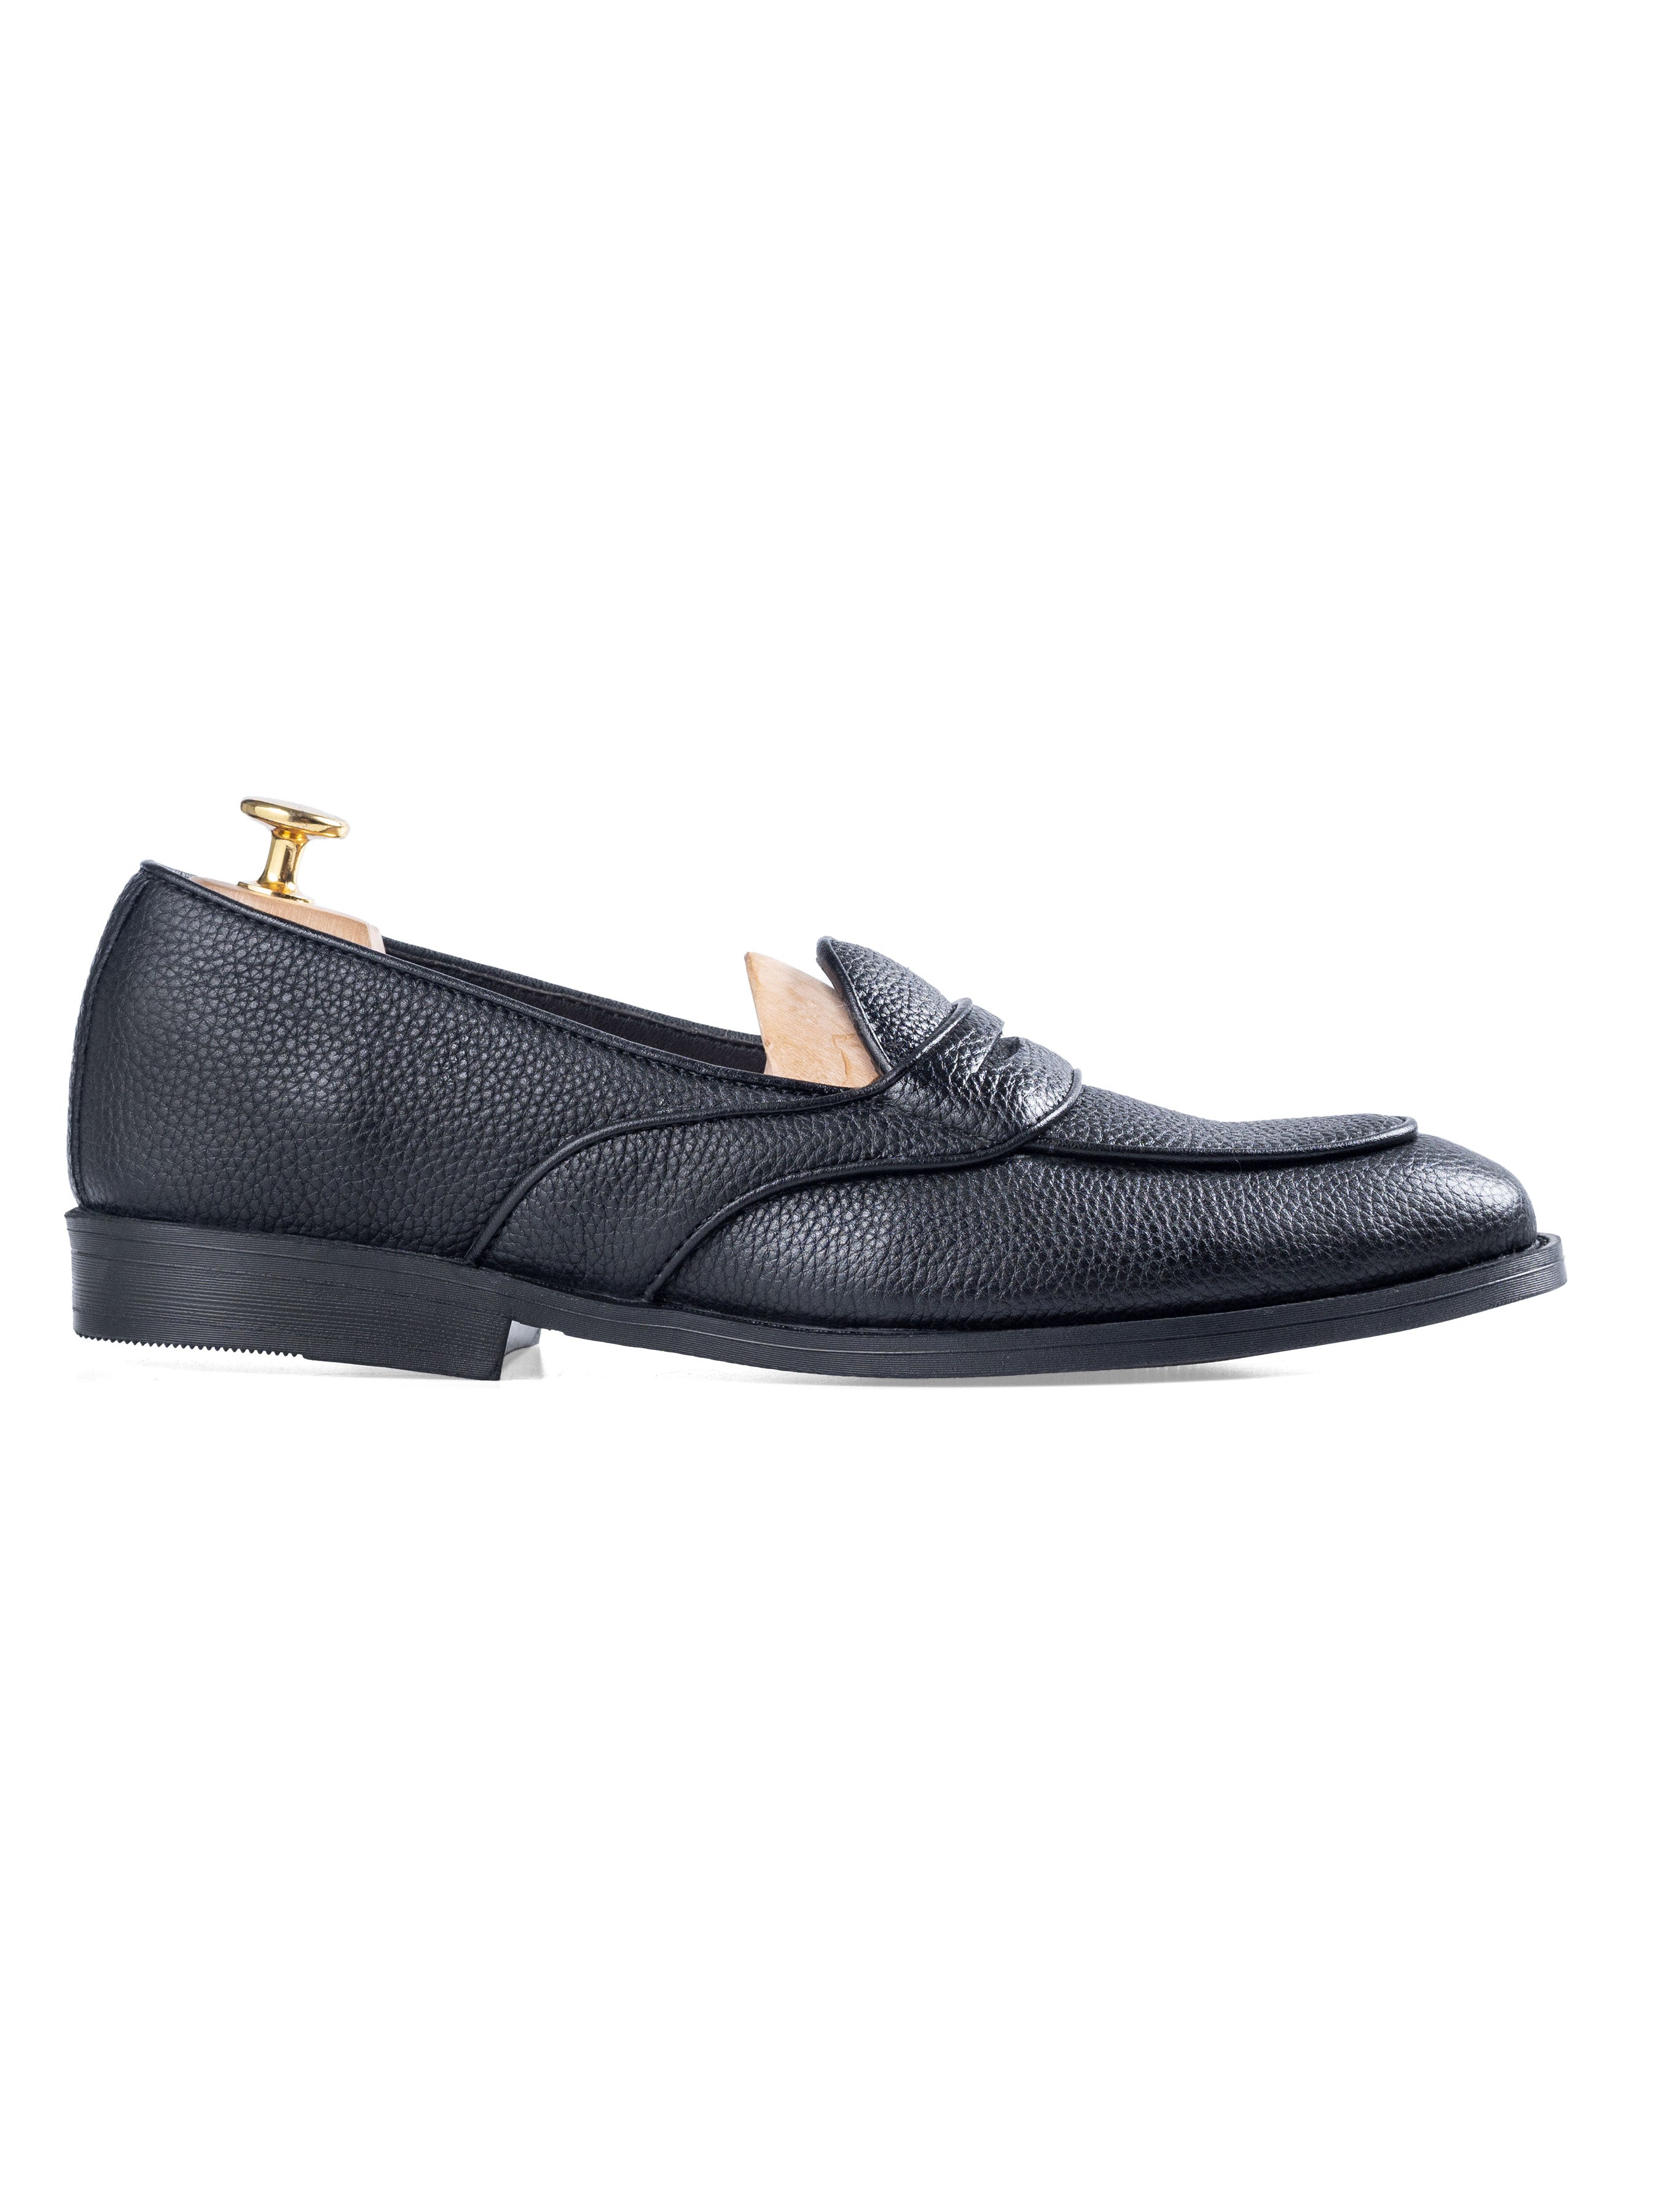 Belgian Loafer with Penny - Black Pebble Grain Leather (Flexi-Sole) - Zeve Shoes